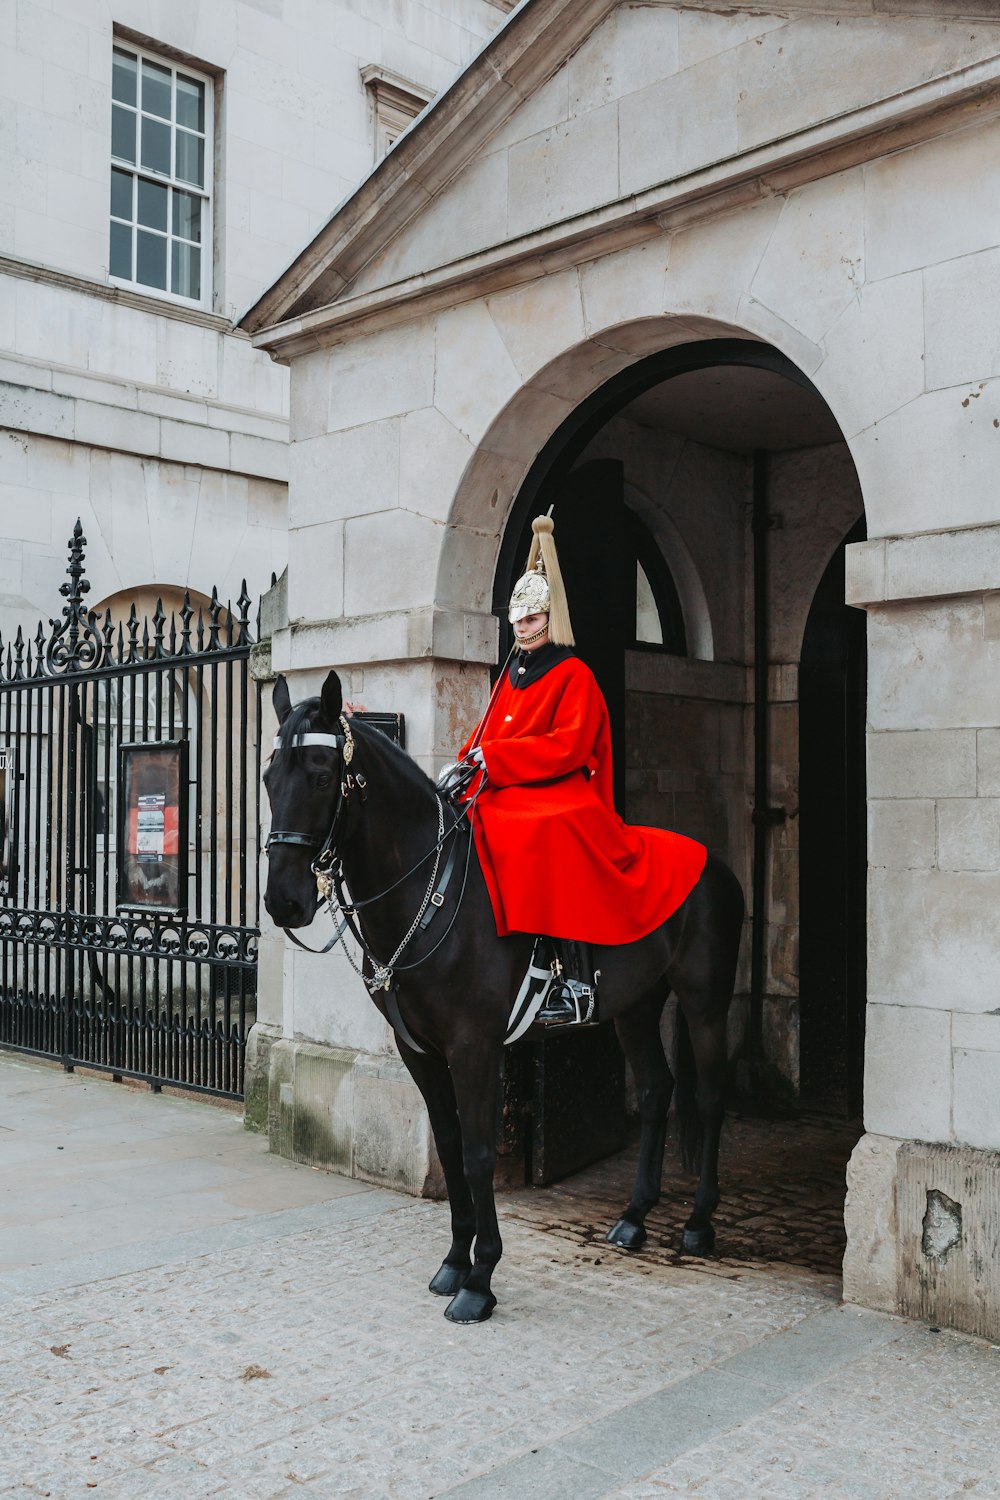 a person in a red robe riding a black horse with Horse Guards in the background